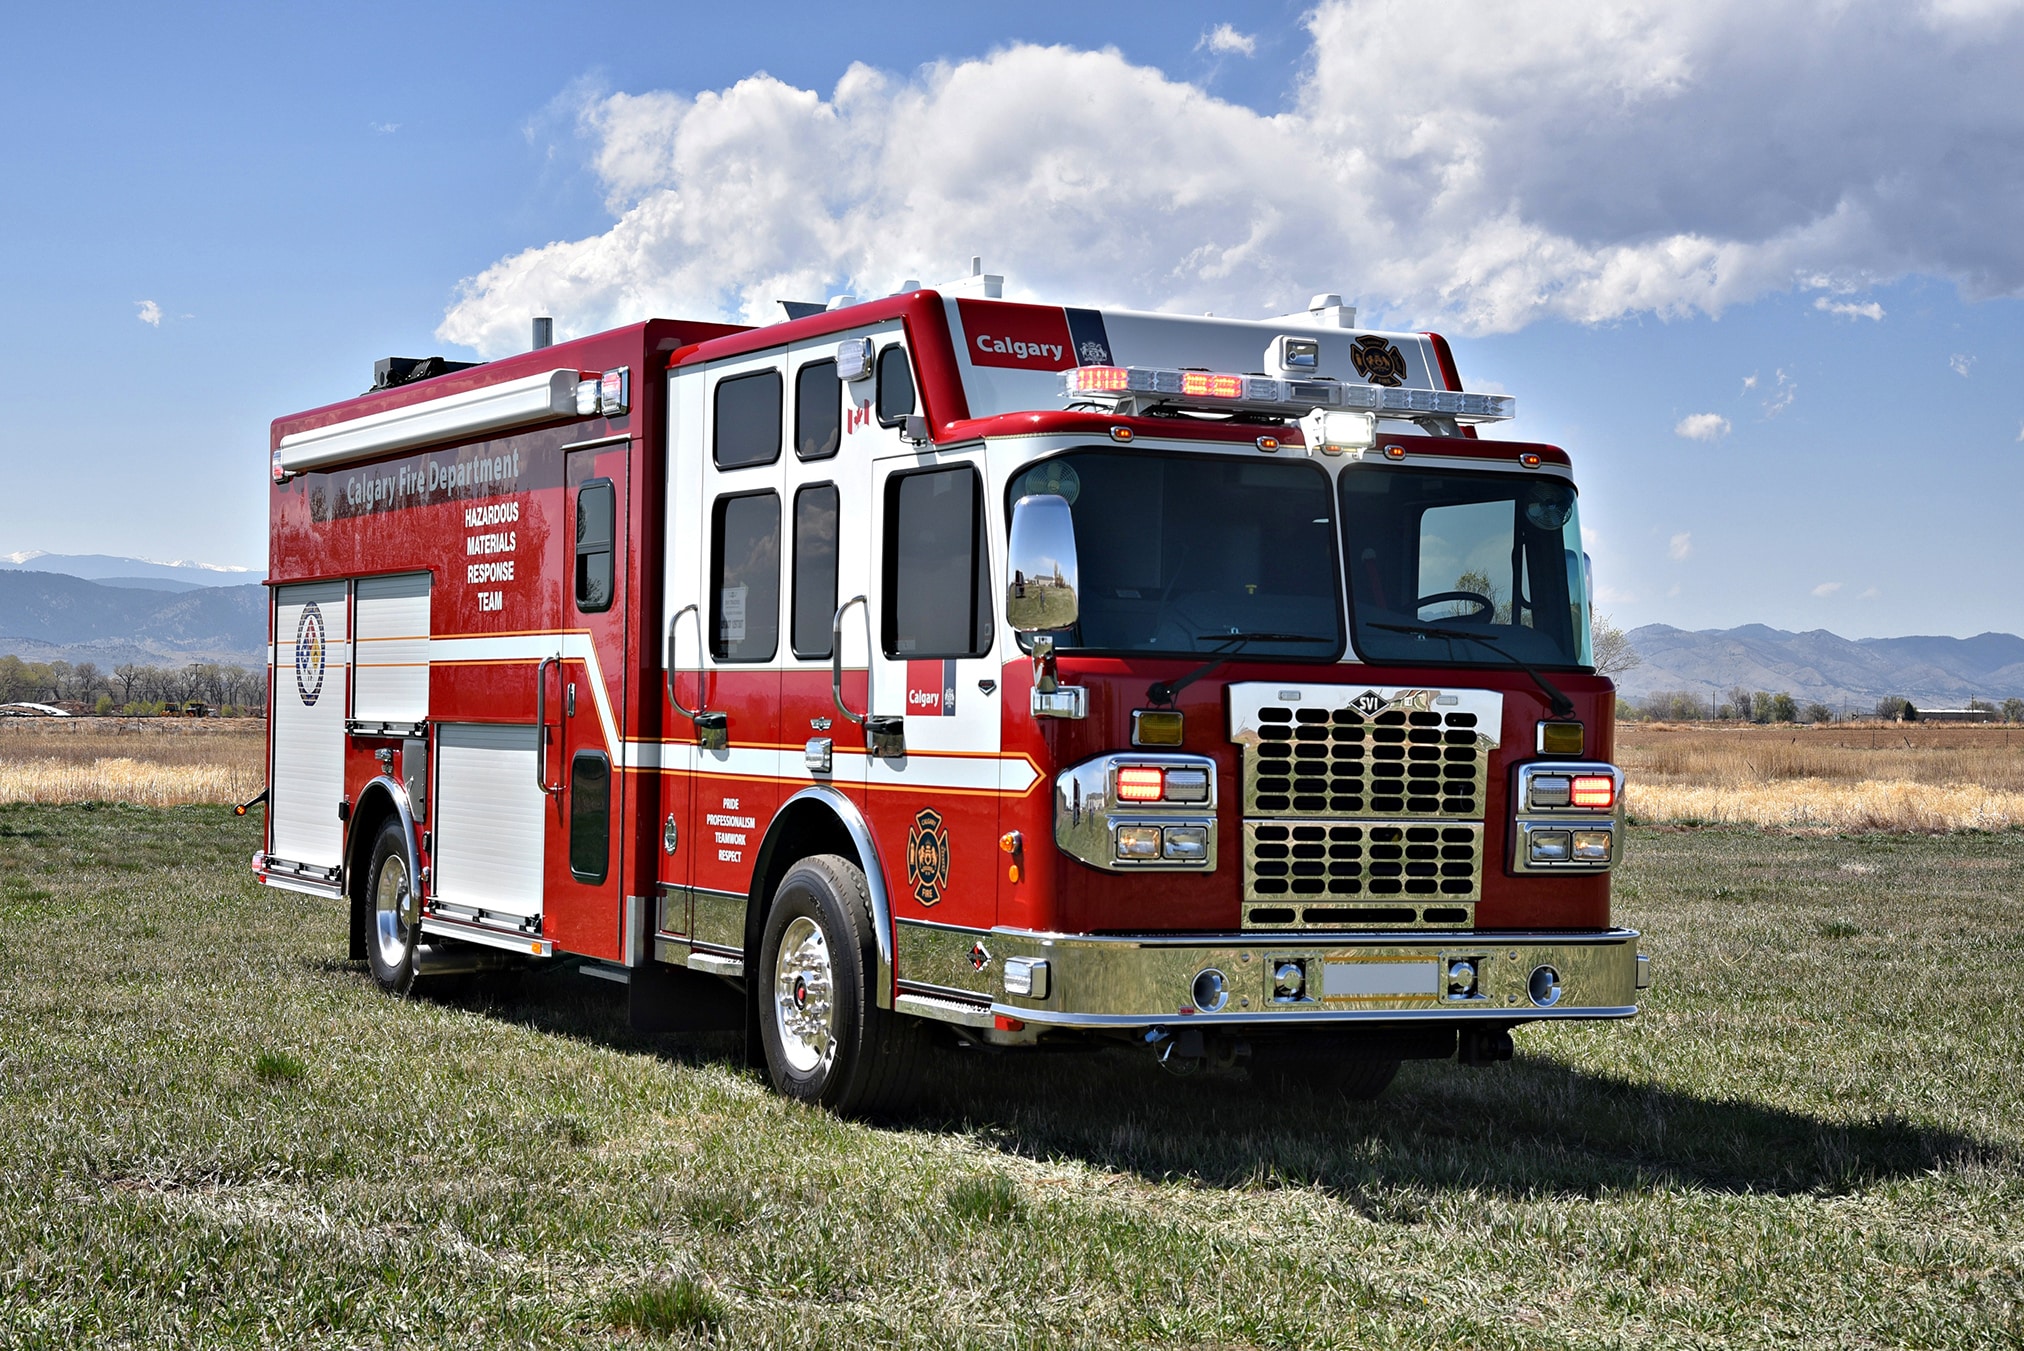 Featured image for “Calgary, AB Fire Department Hazmat 973-975”